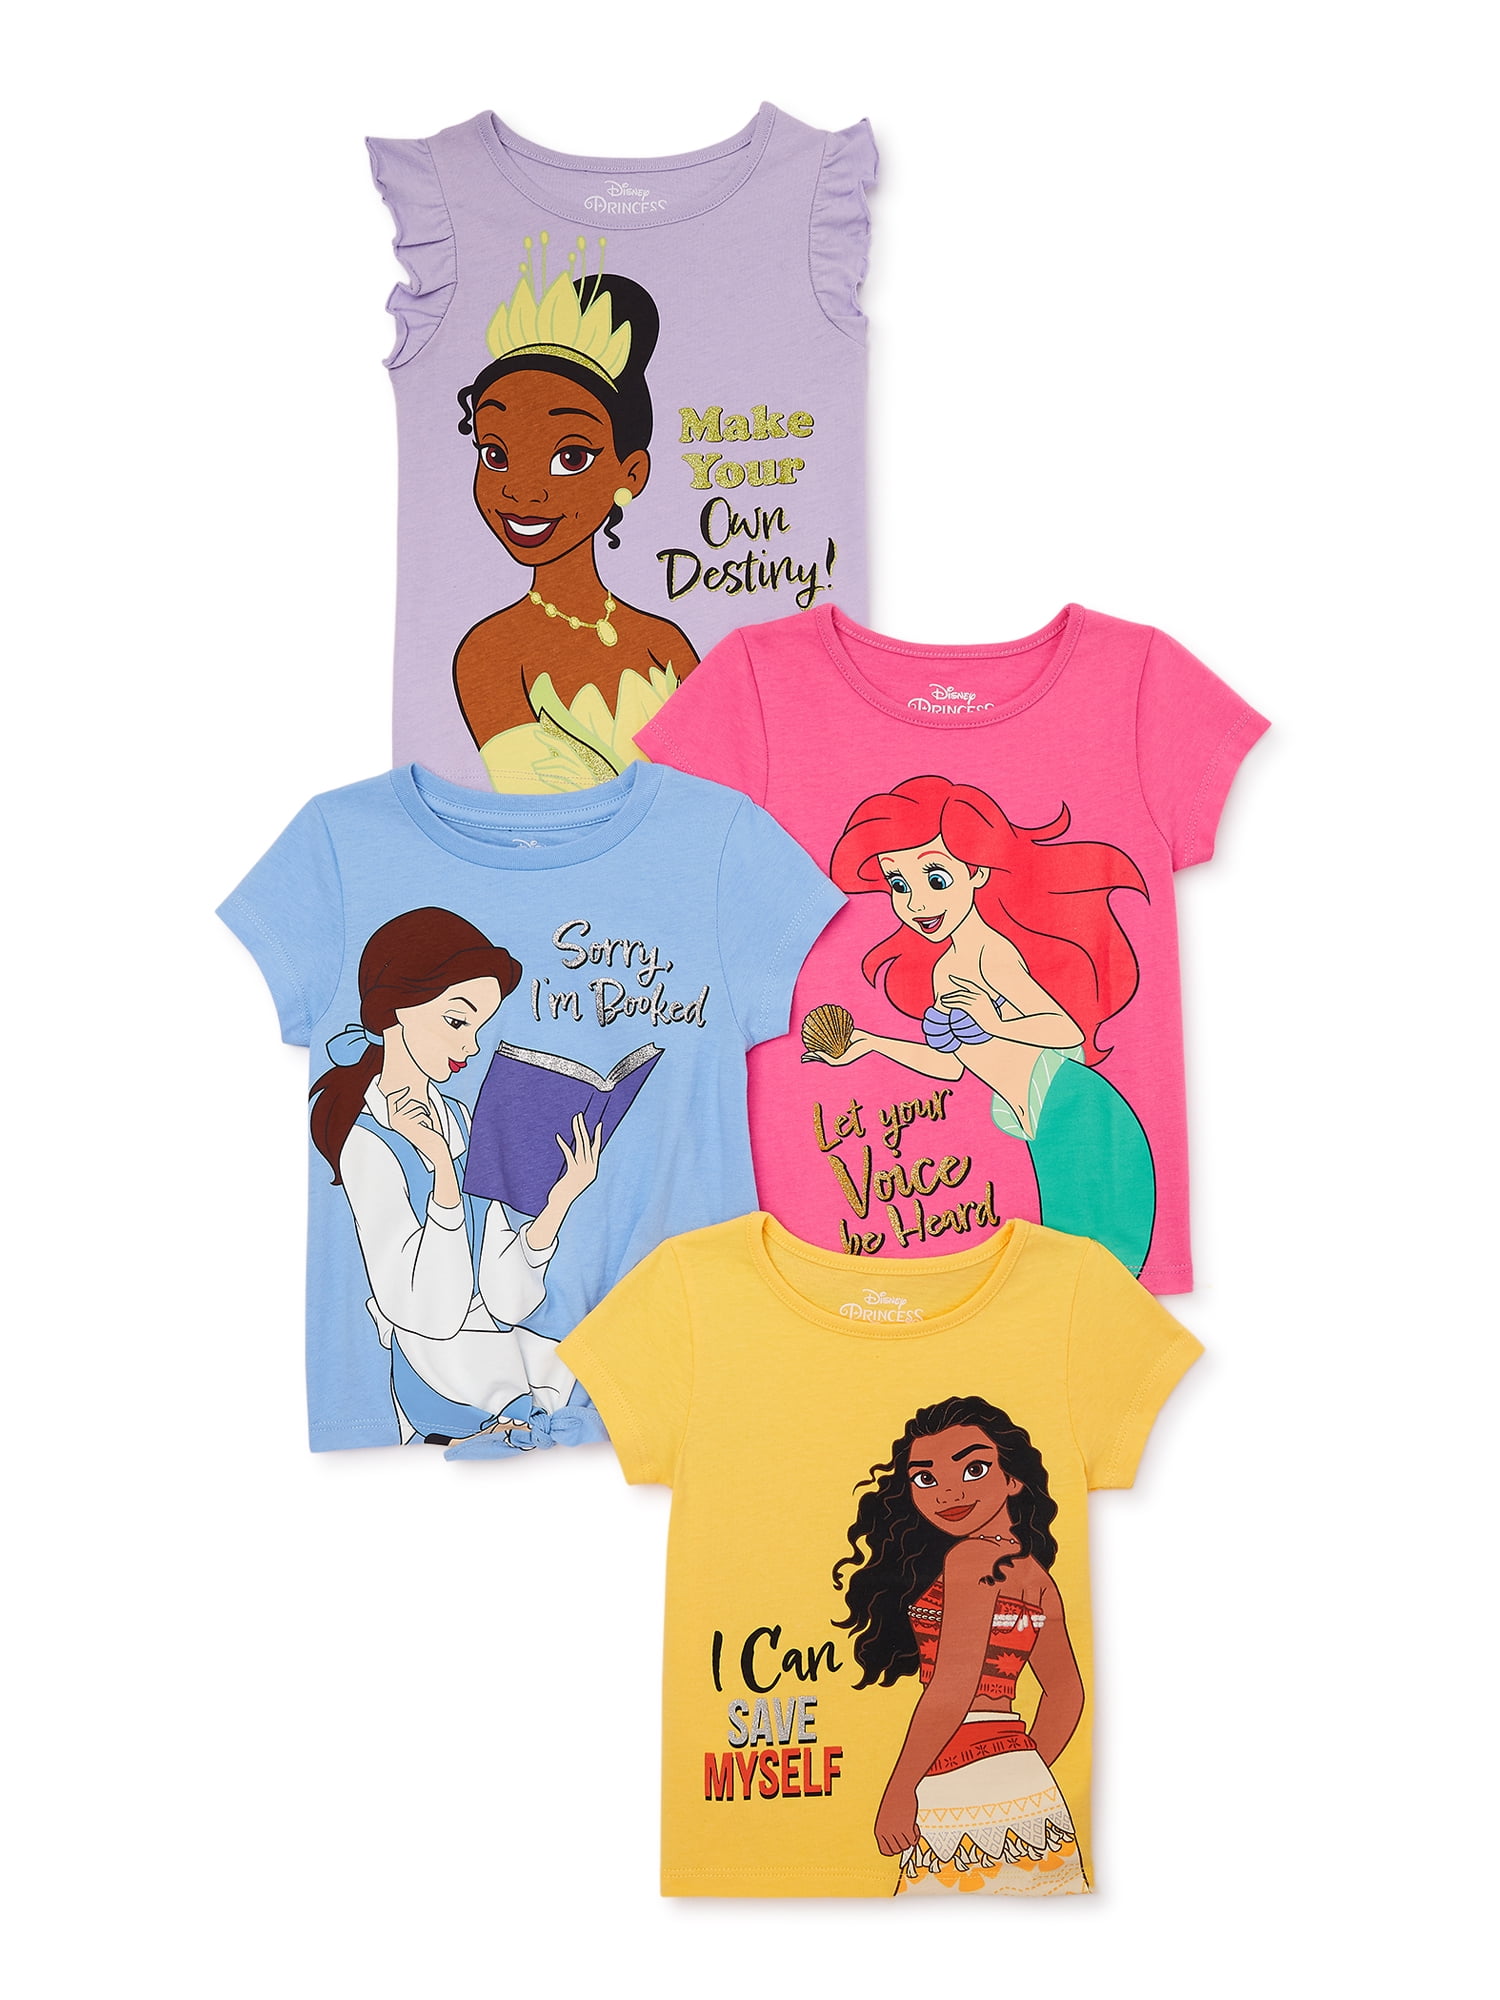 Disney Princess Toddler Girls Fashion T-Shirts with Short Sleeves, 4-Pack,  Sizes 2T-5T 